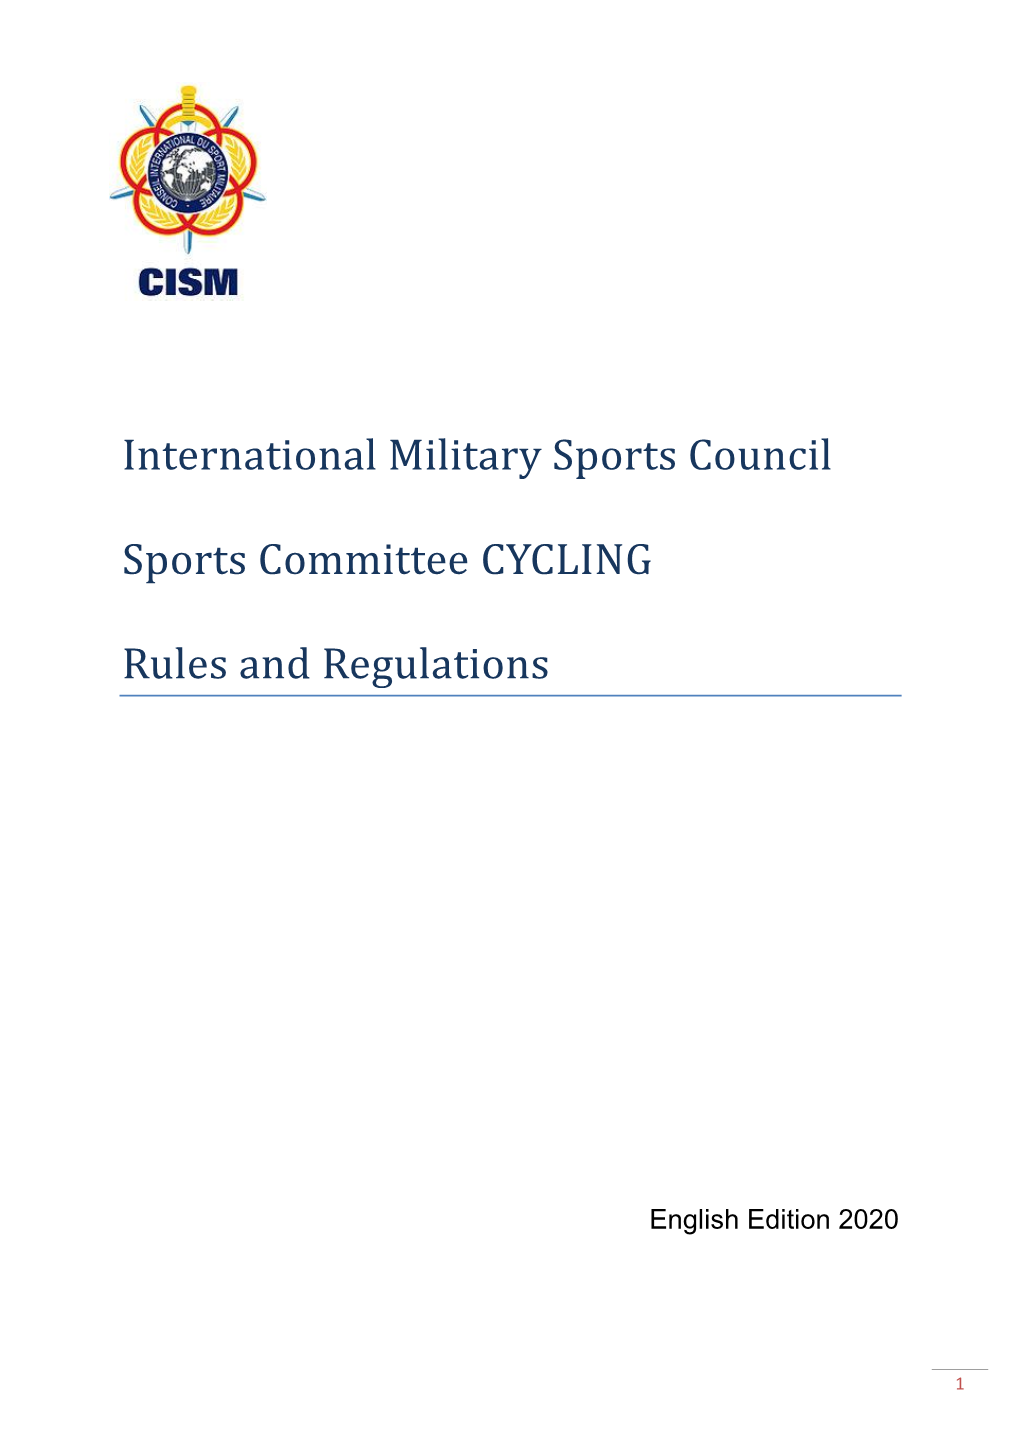 International Military Sports Council Sports Committee CYCLING Rules and Regulations